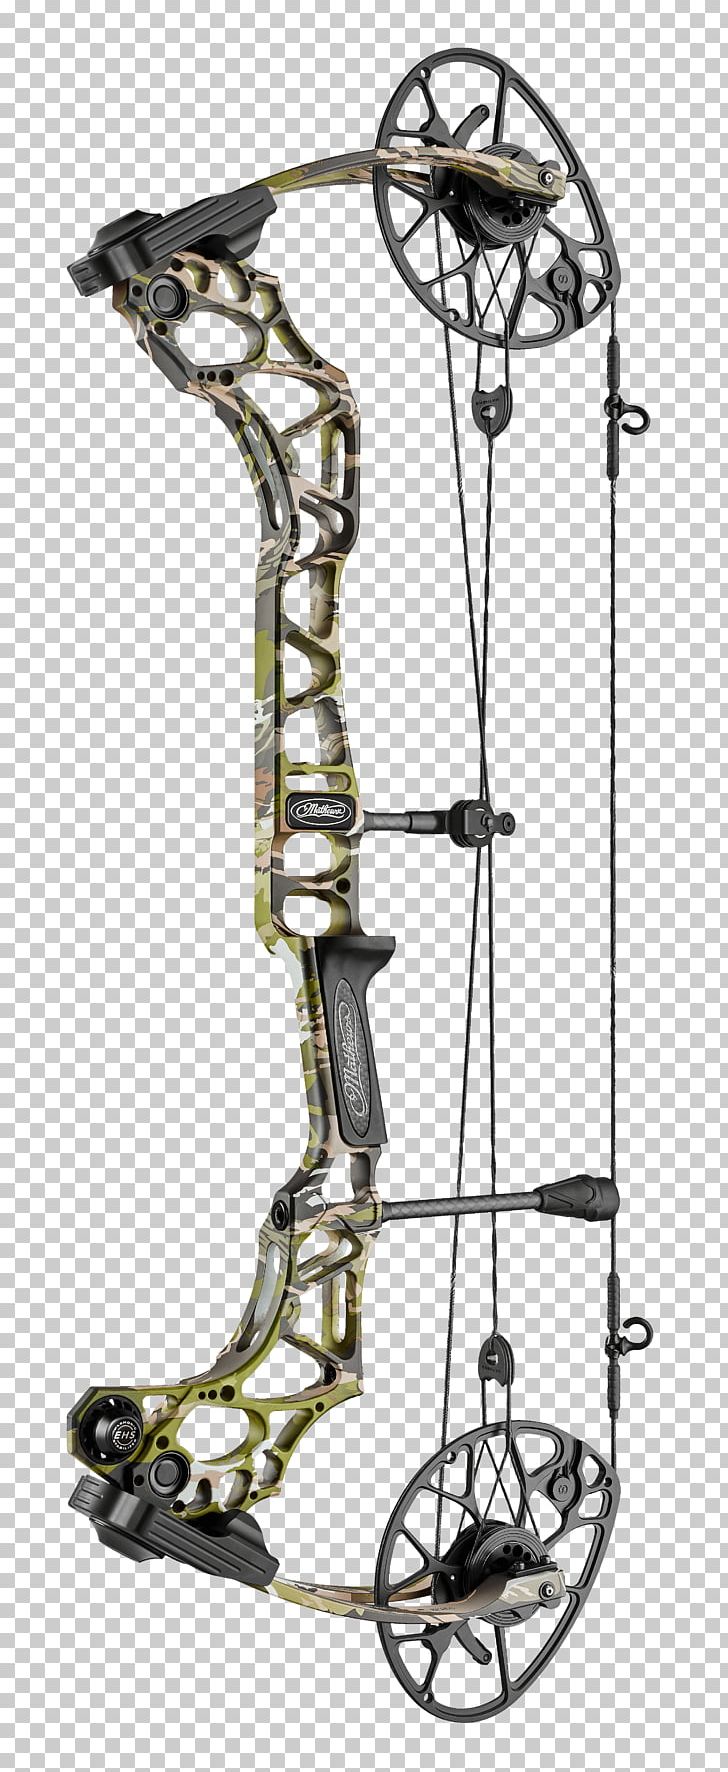 Bowhunting Compound Bows Mathews Archery PNG, Clipart, Archery, Archery Country, Archery Trade Association, Arrow, Bit Free PNG Download